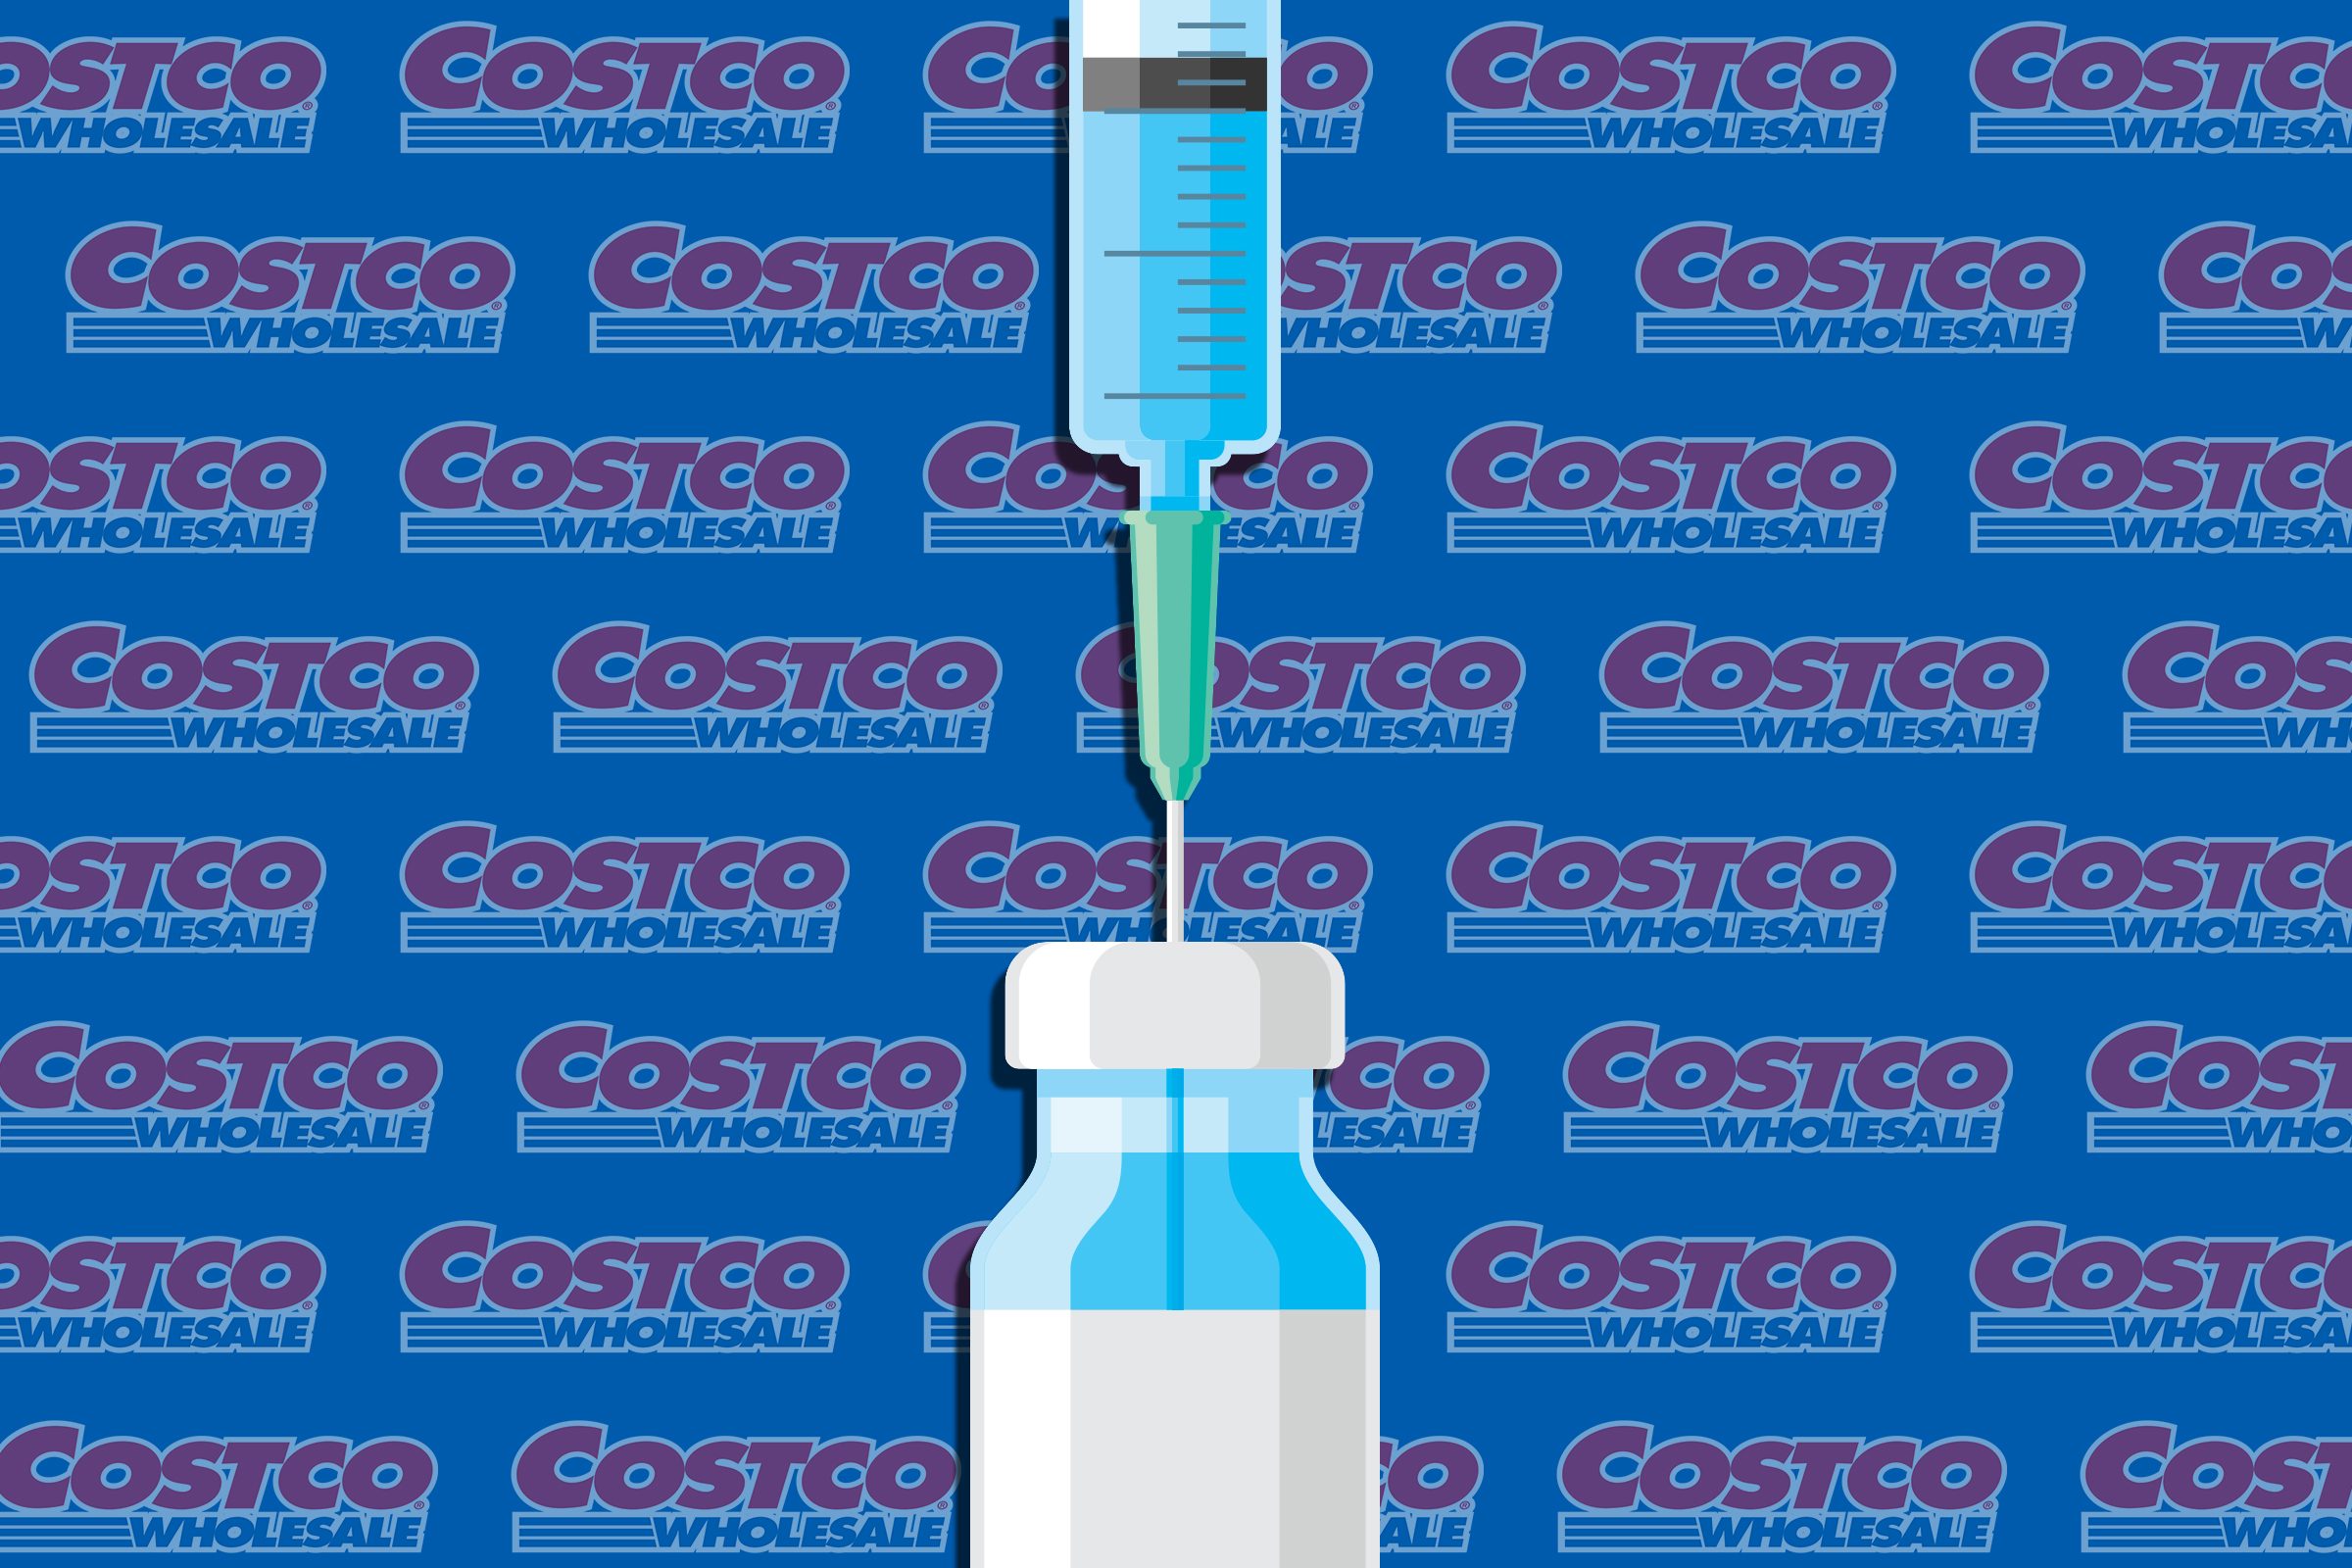 How to Get a Flu Shot at Costco